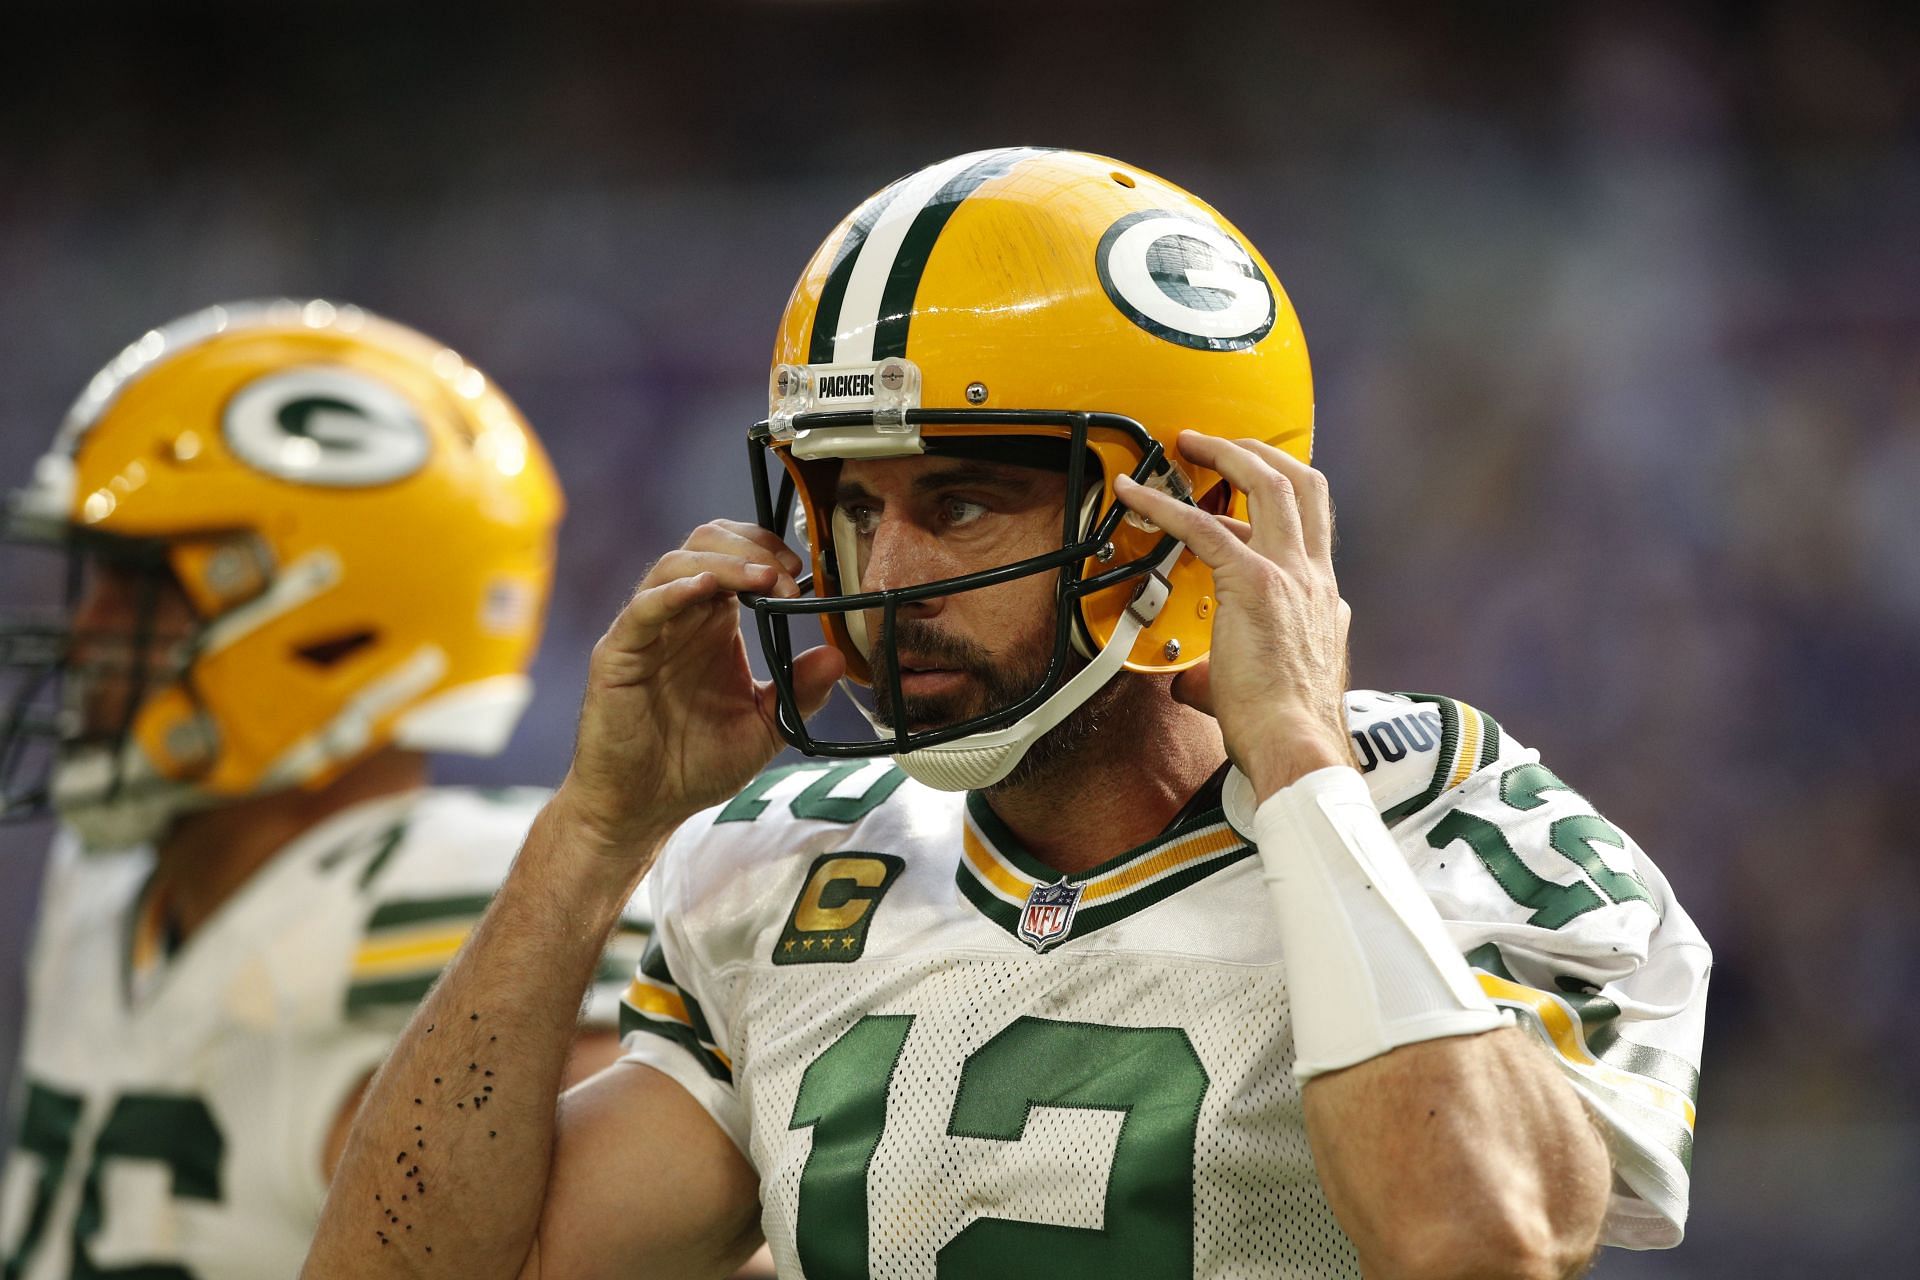 I Tossed the Surface Back Against Carolina”: Aaron Rodgers